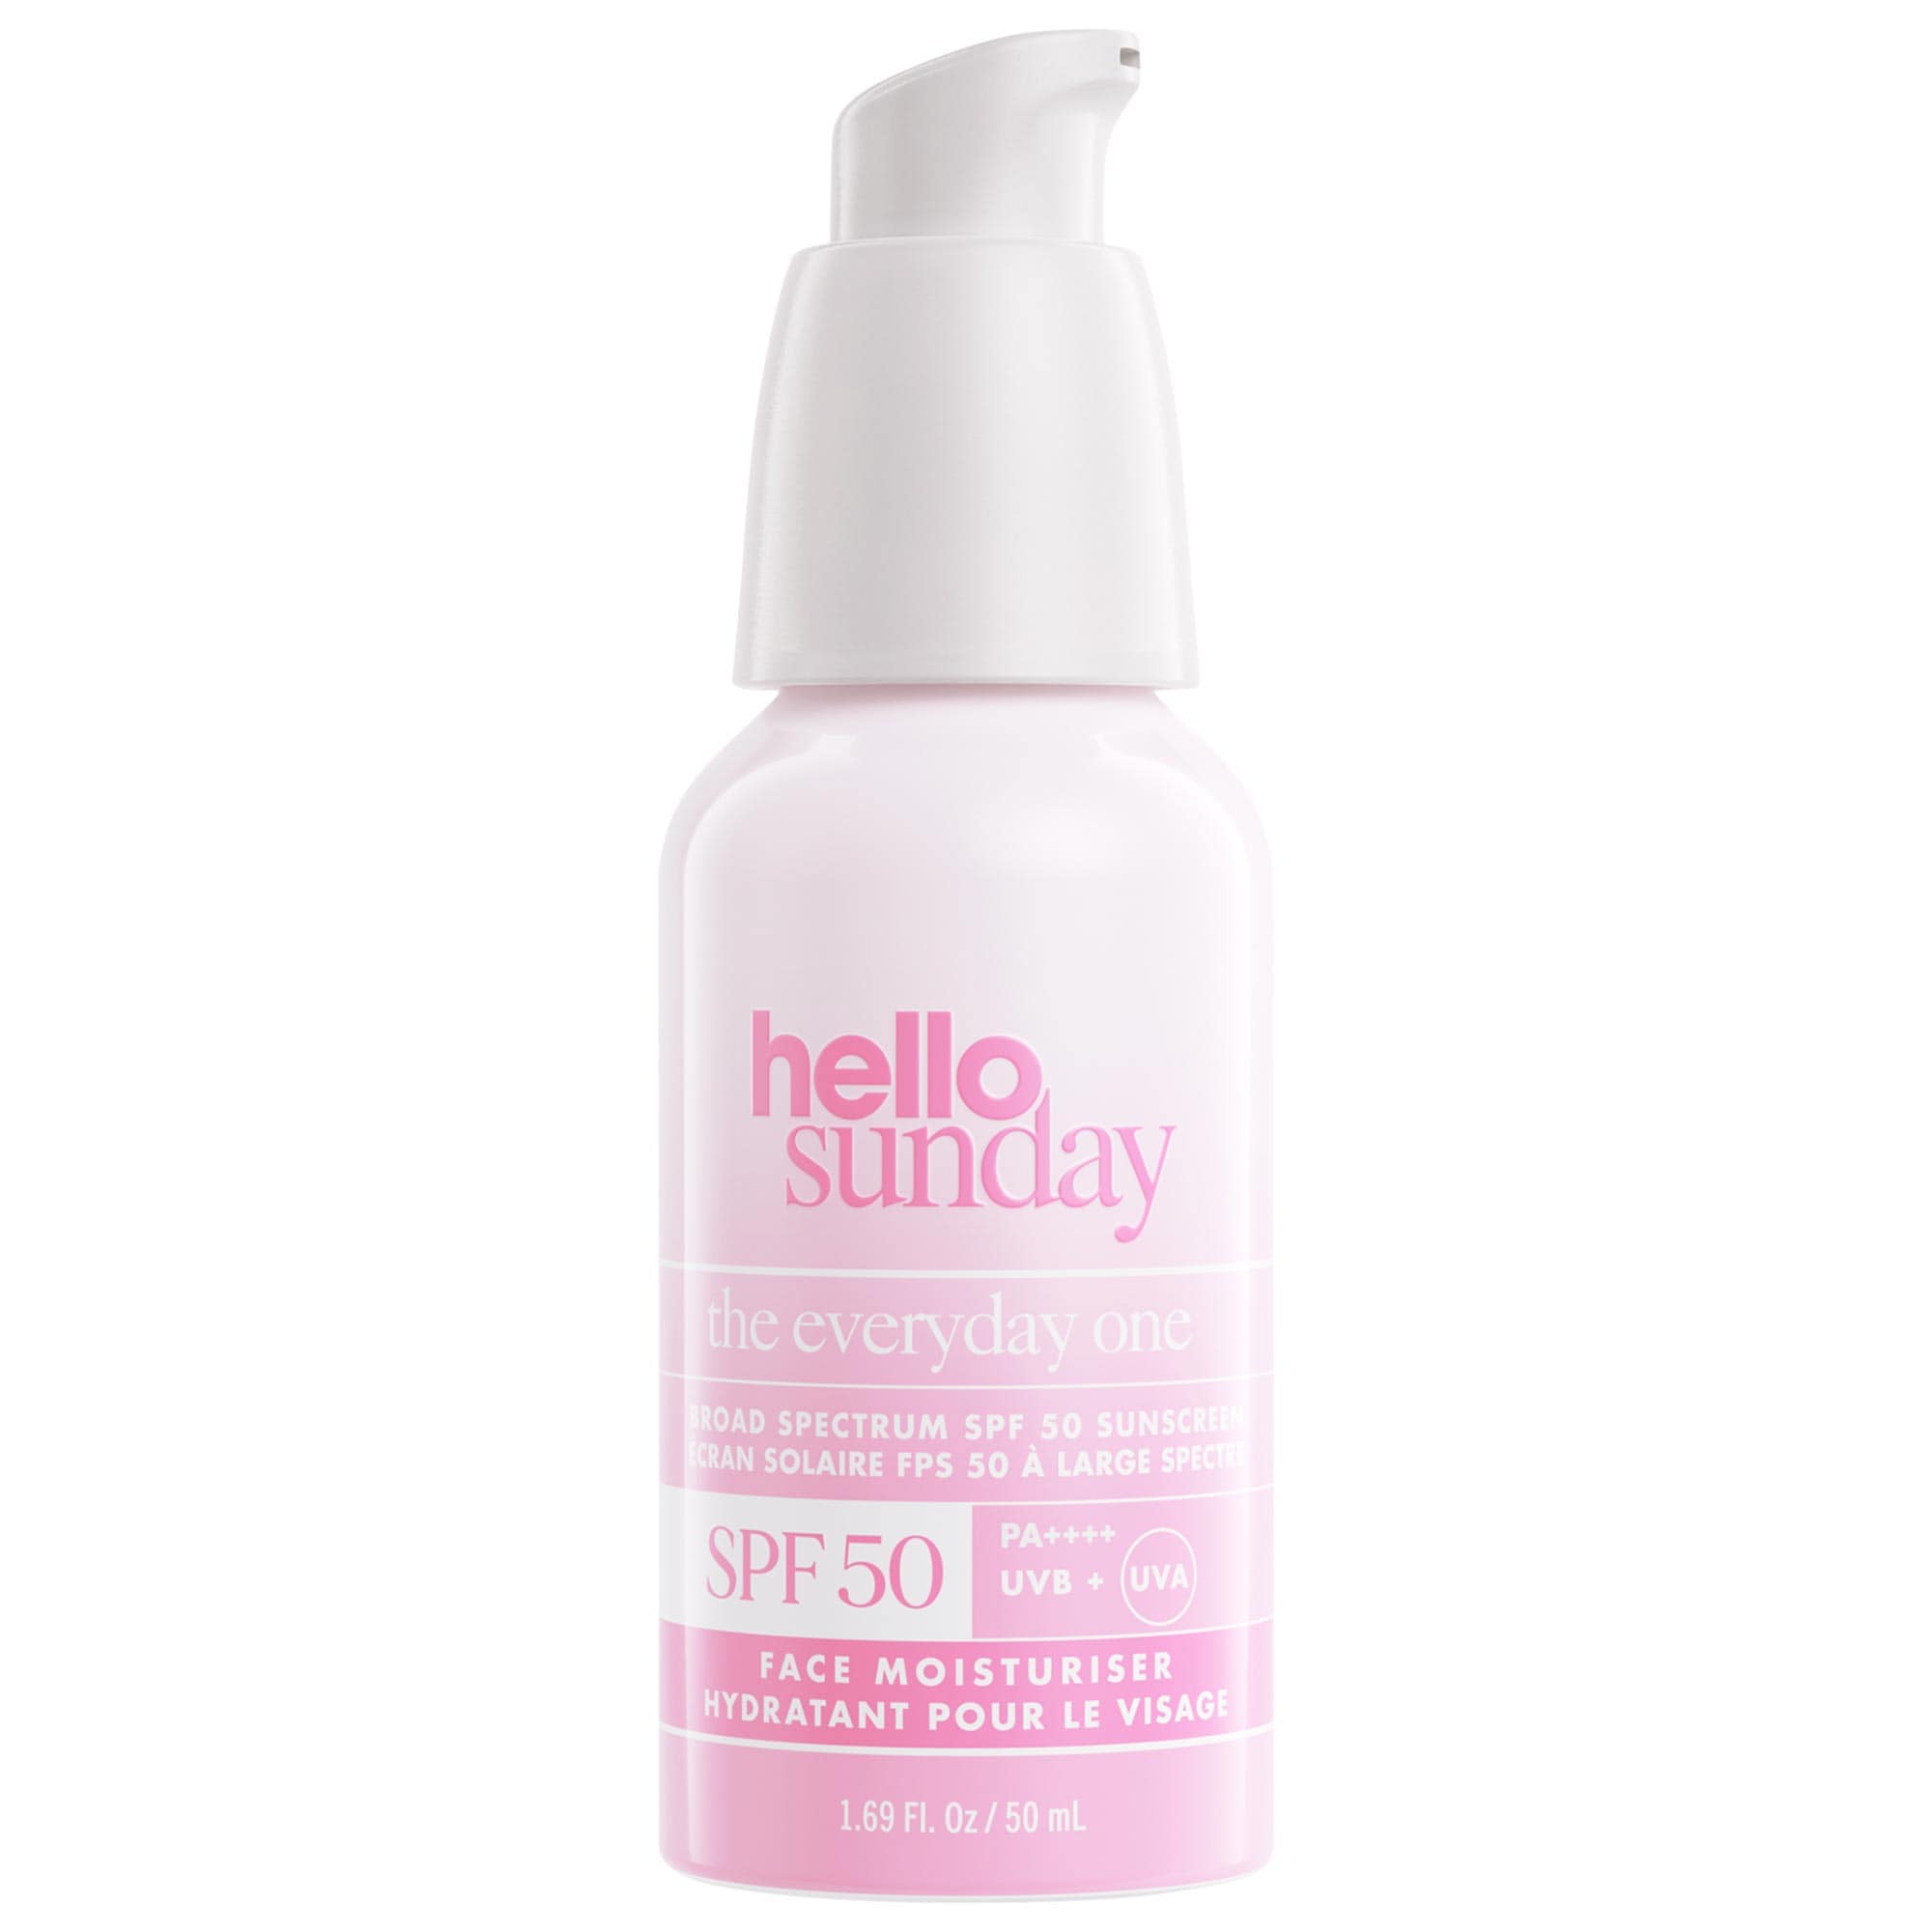 The Everyday One SPF 50 Face Sunscreen Moisturizer with Hyaluronic Acid Hello Sunday